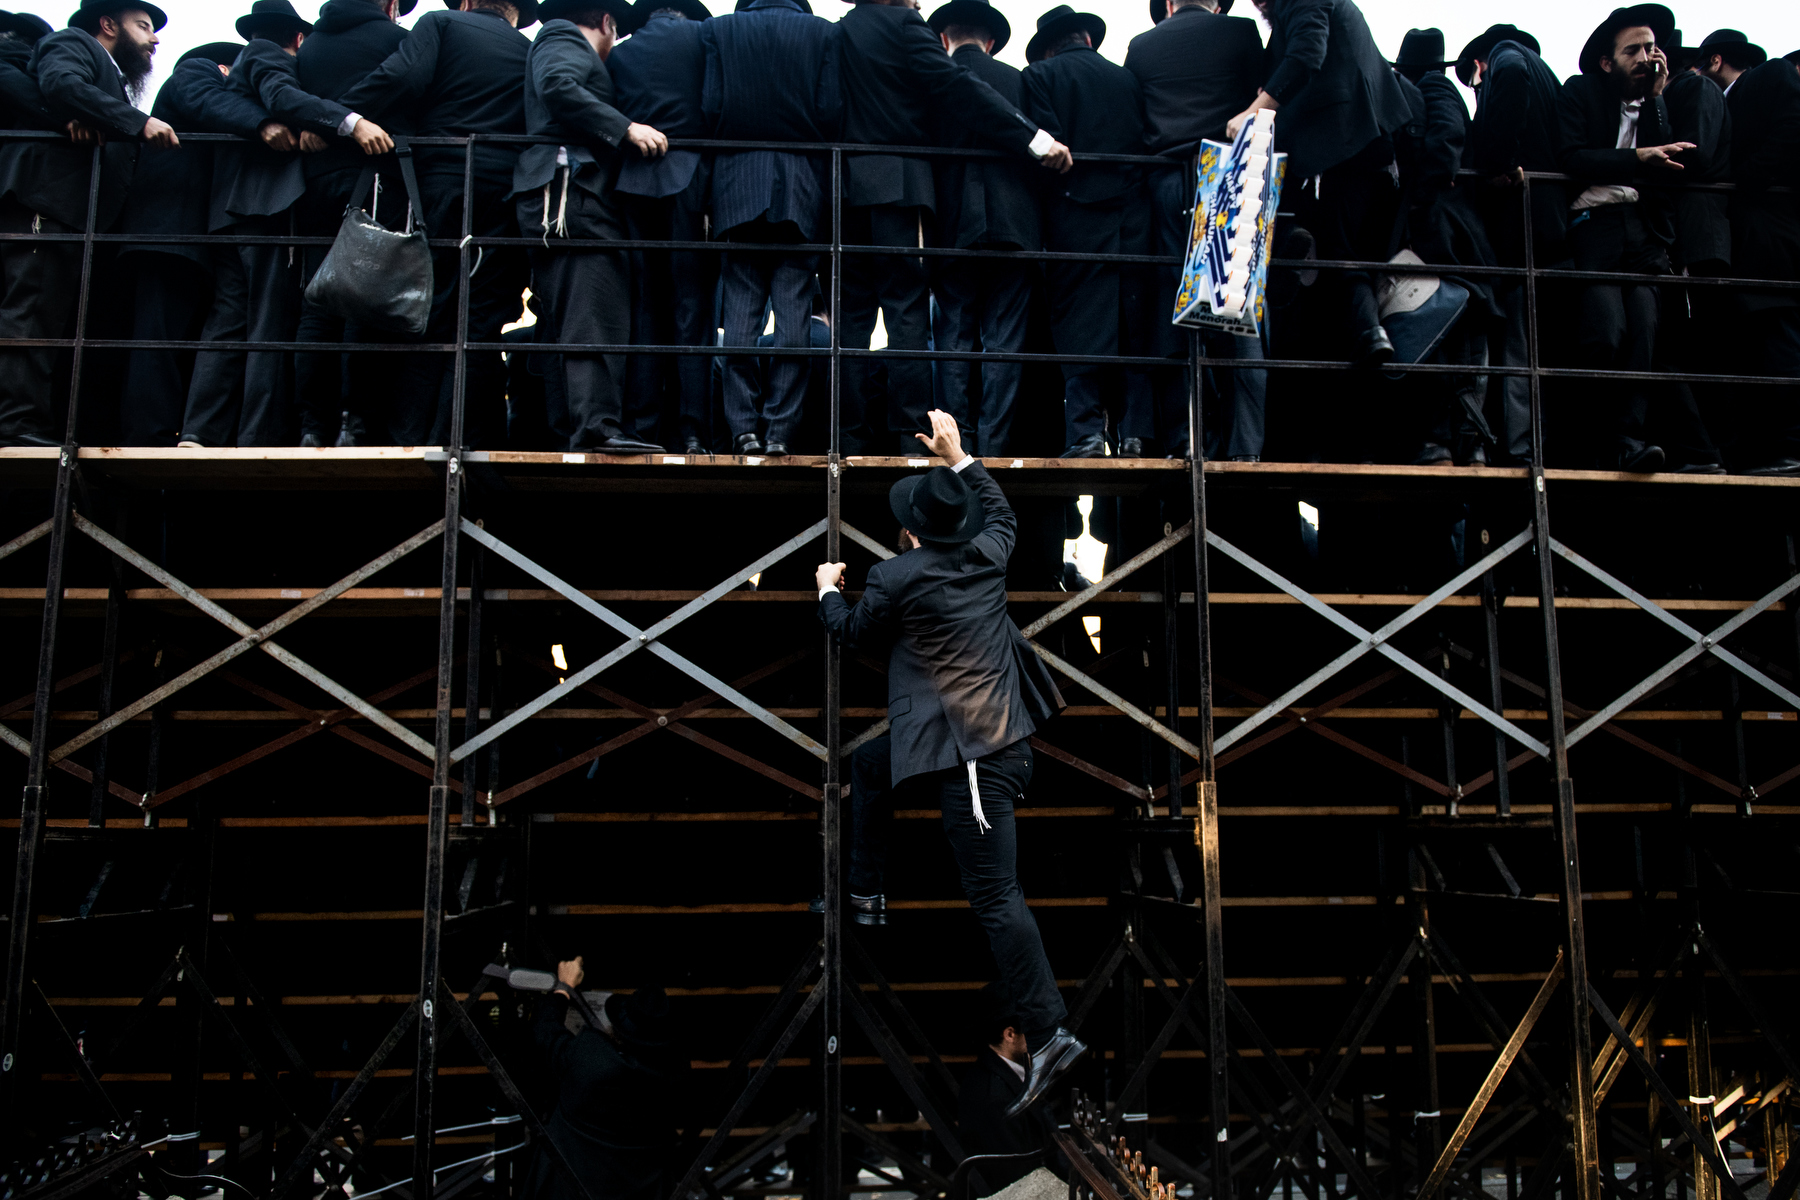  A Chabad-Lubavitch rabbi climbs the back of some stands as thousands gather for a group photo in front of the movement's headquarters in the Crown Heights neighborhood of Brooklyn, NY. 